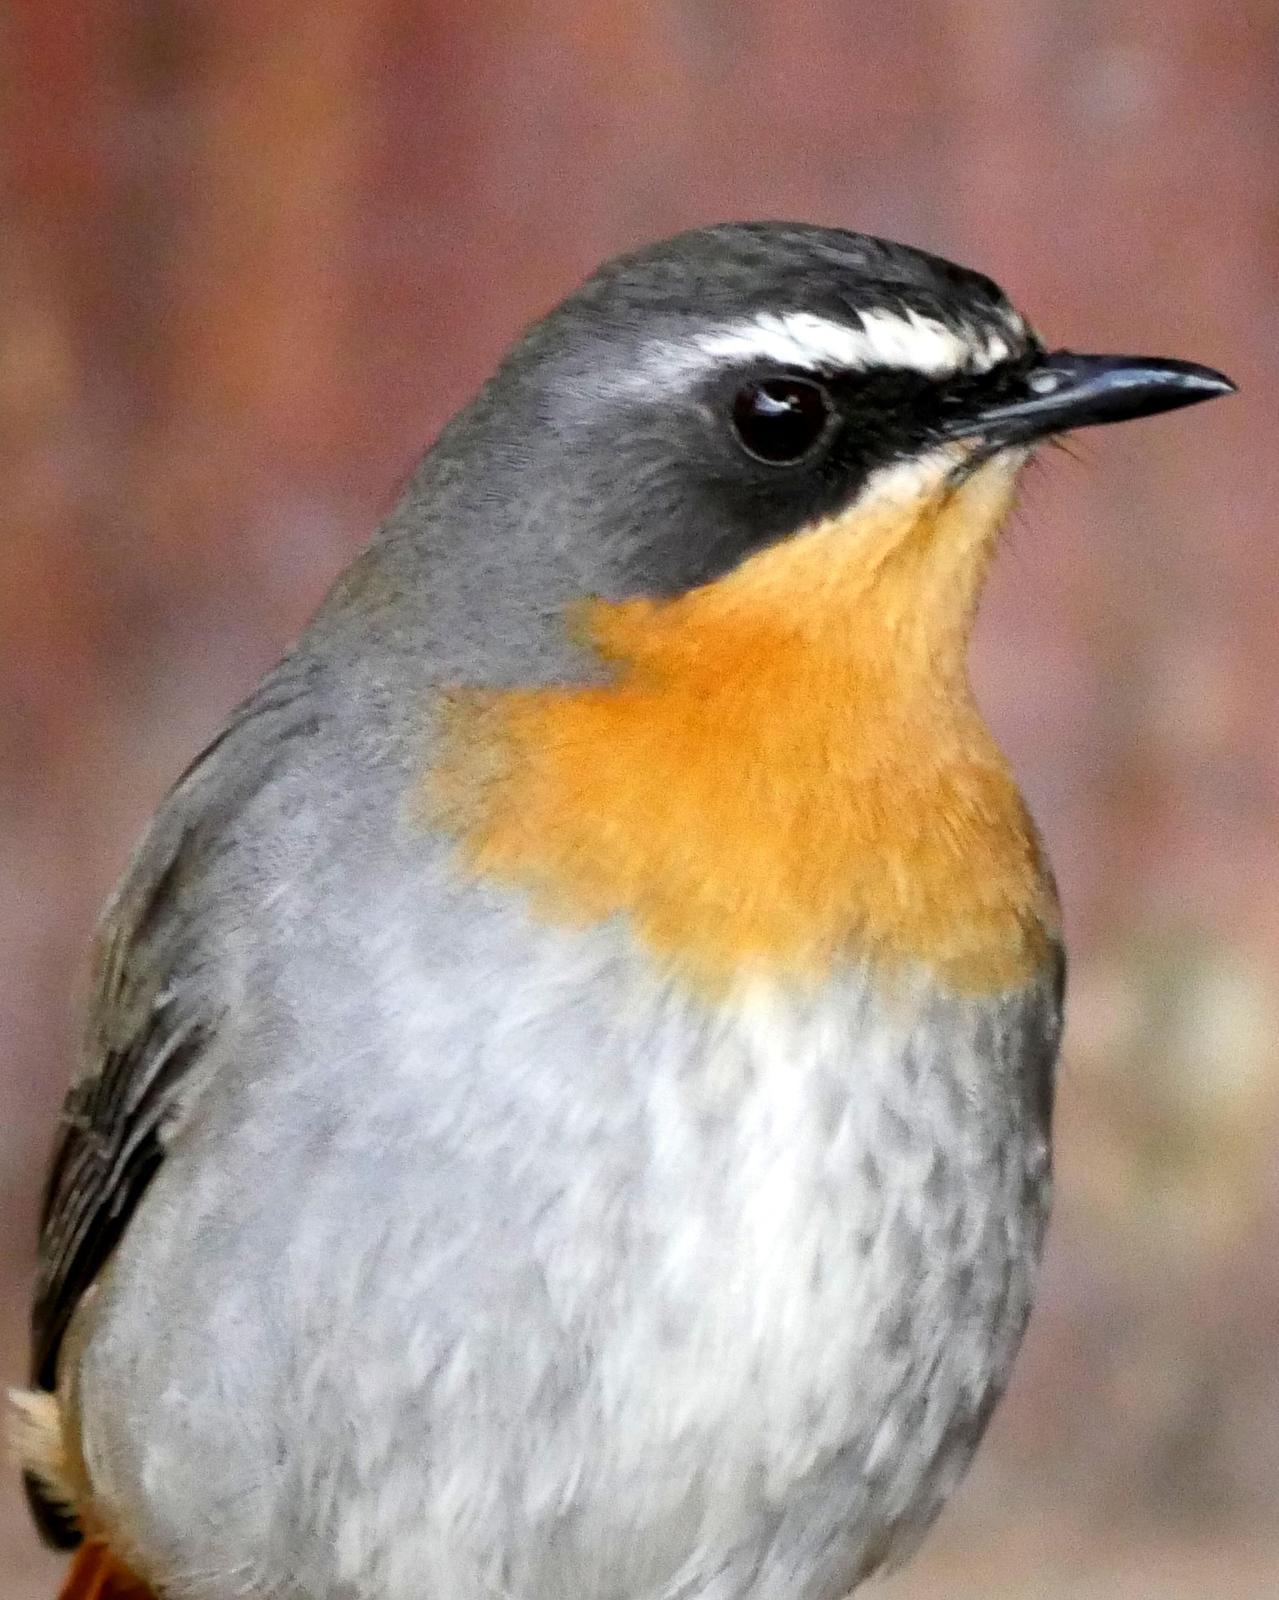 Cape Robin-Chat Photo by Peter Lowe